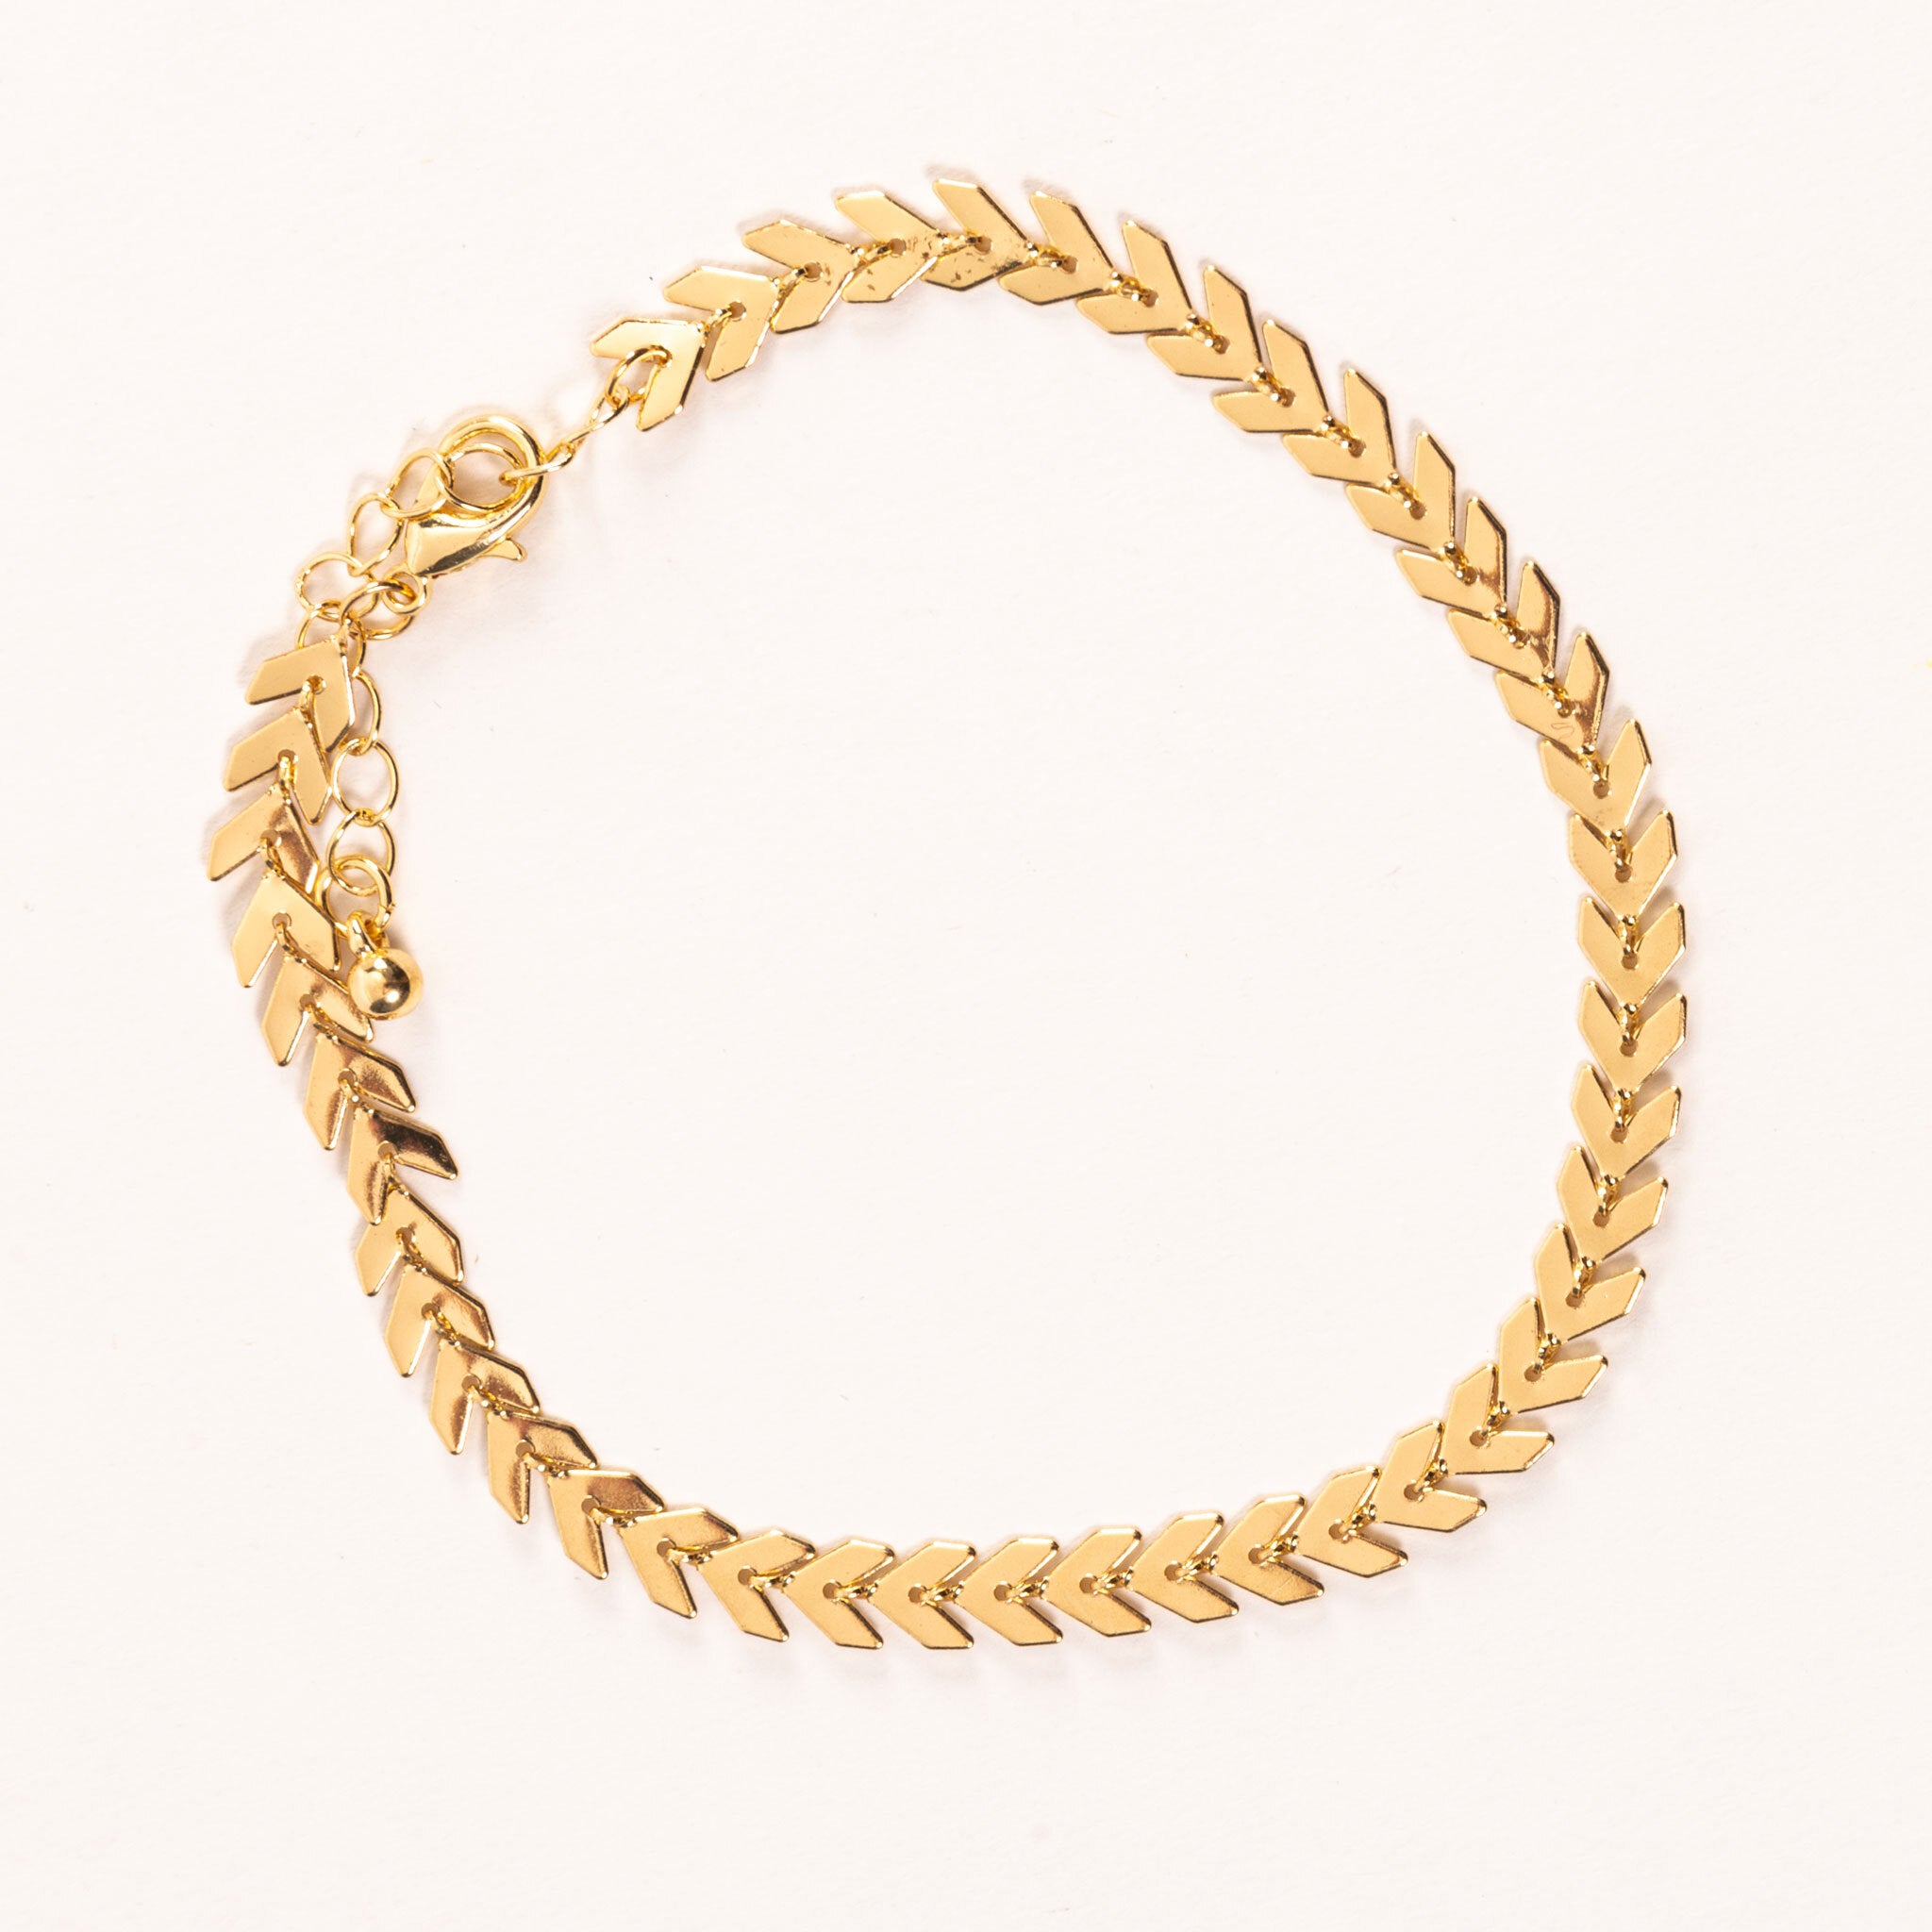 Elsie & Zoey® Alexis Arrow Chain Anklet - anklets | Howard's